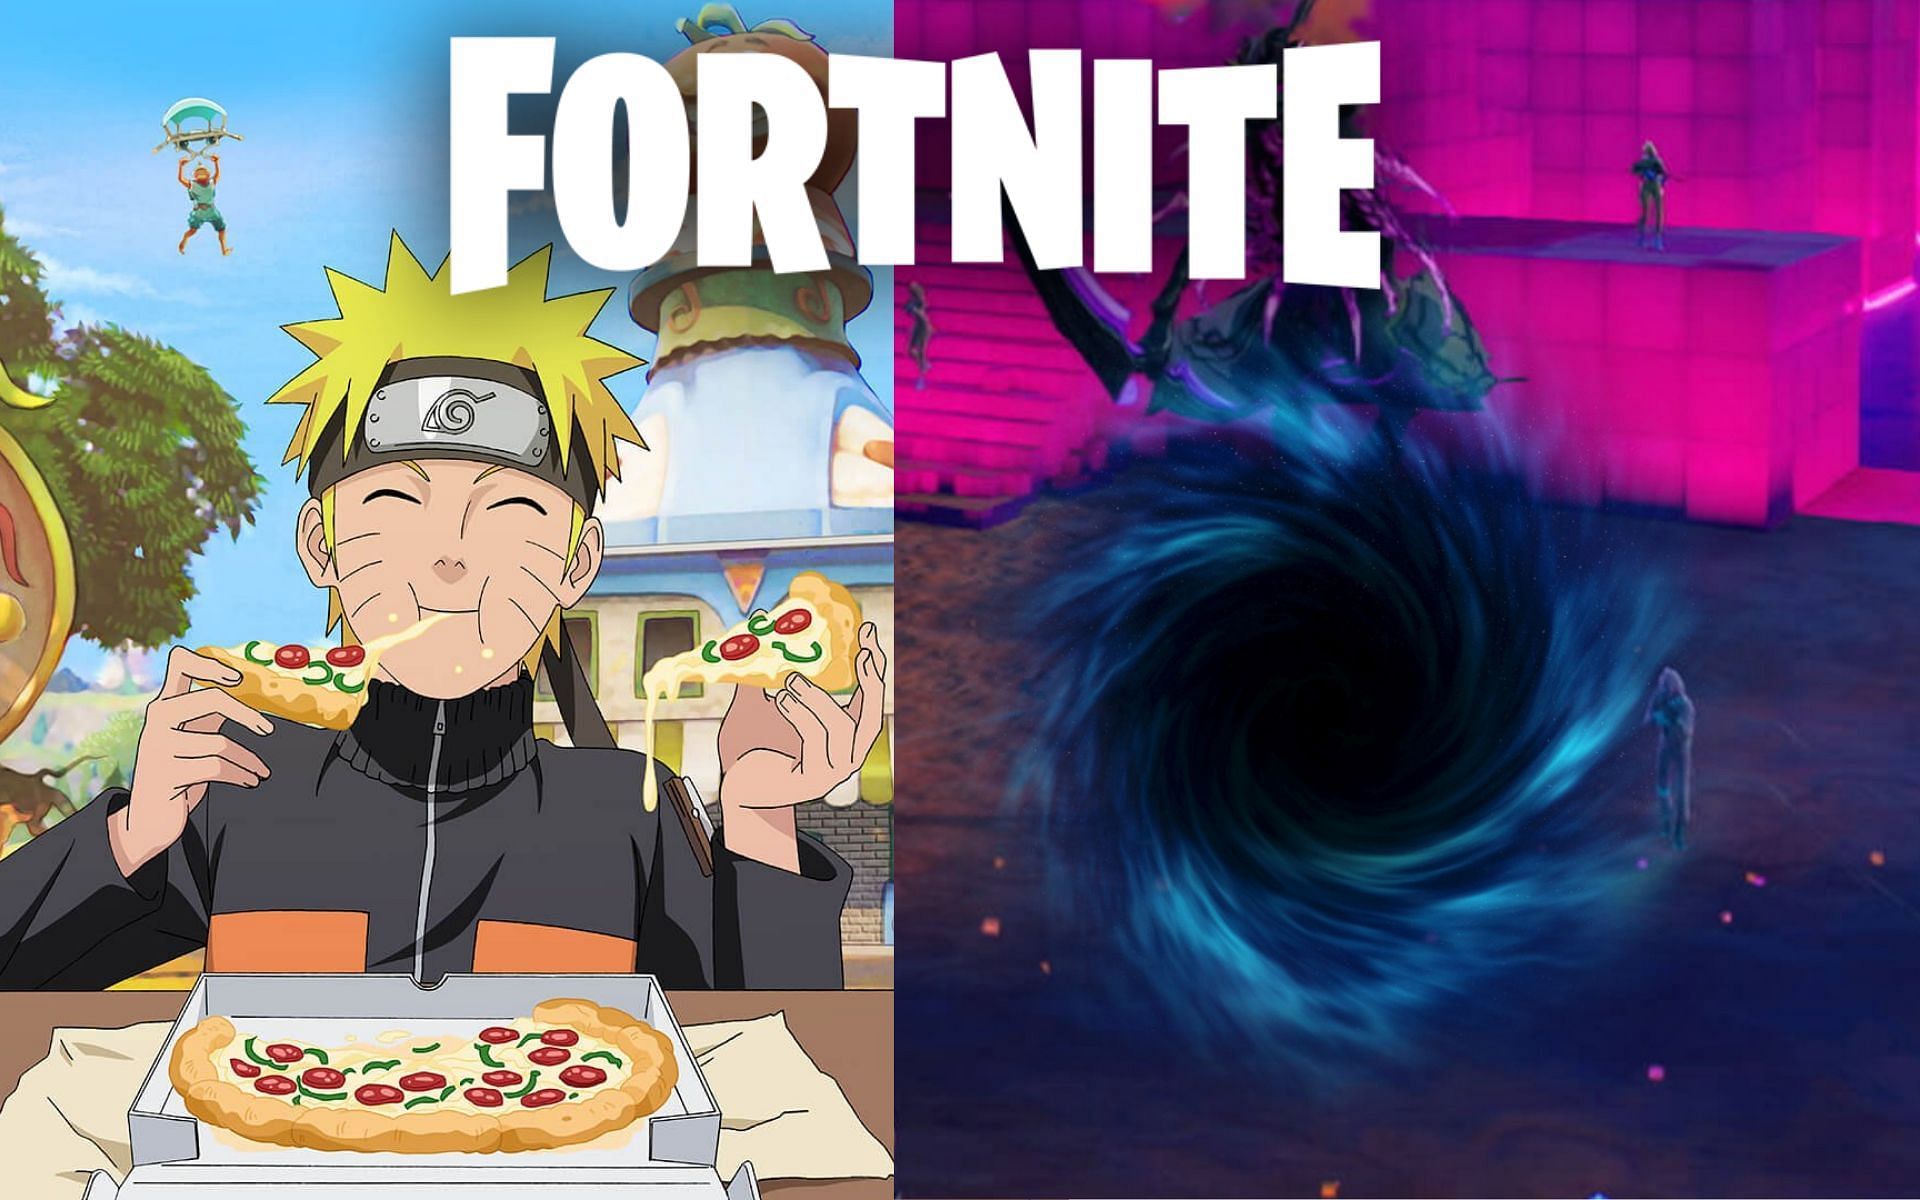 Fortnite Update v18.40: Adds Naruto, Mechs, and More